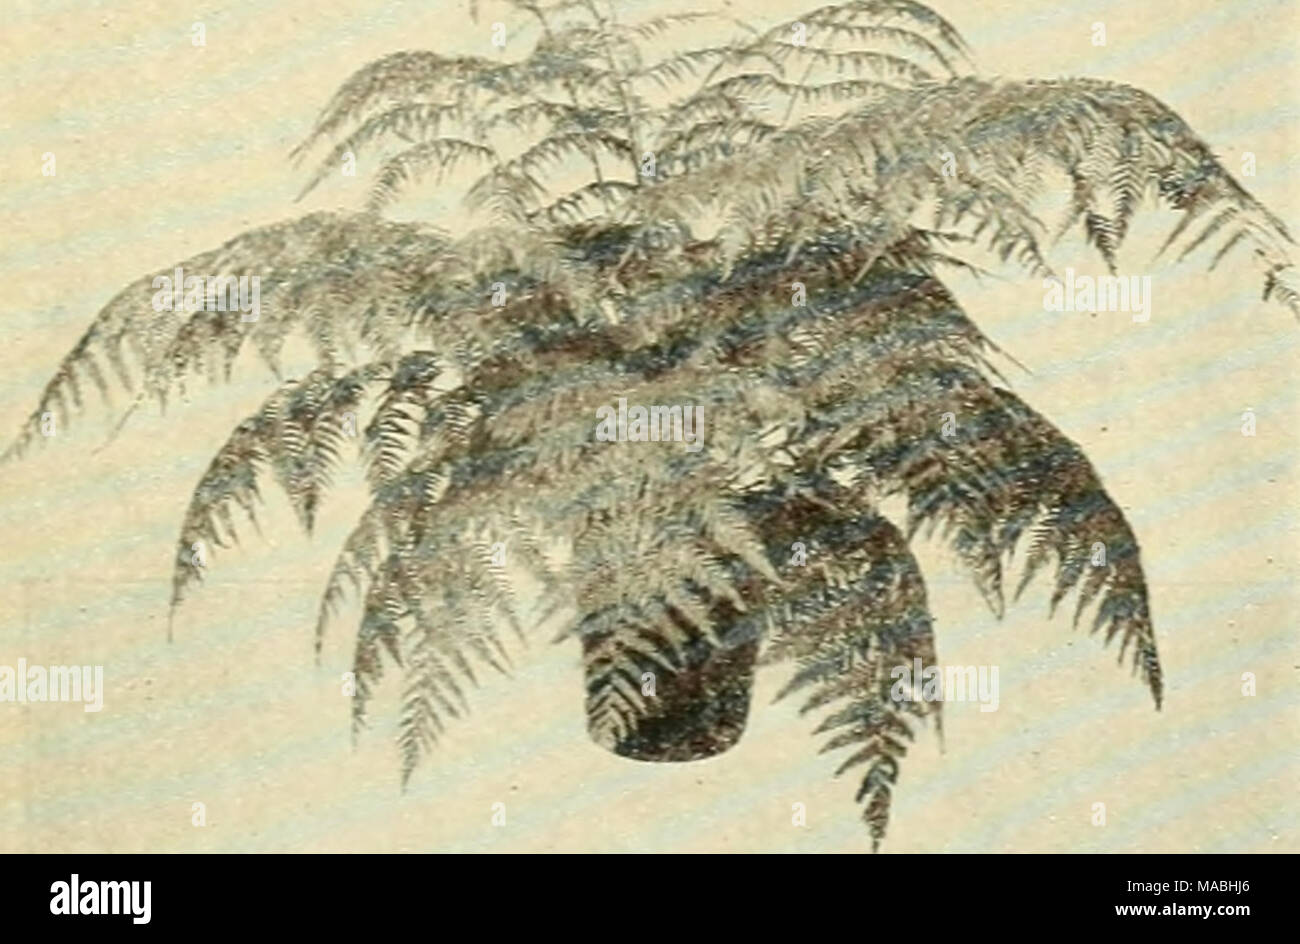 . Dreer's wholesale price list for florists . Cibotium Schiedei Cibotium Schiedei—Mexican Tree Fern One of the most desirable and most valuable Ferns for room decoration. Grows to considerable size and is most attractive with its lovely large fronds of a beau- tiful light green color. A beautiful lot of strong specimen plants. Each Splendid plants in 10-inch tubs $6 00 Cyrtomium Rochfordianum compactum The Improved Holly Fern Next to the Boston Ferns this Holly Fern is the most satisfactory for home and apartment use because of its resistance to unfavorable conditions. Has rich glossy dark gre Stock Photo